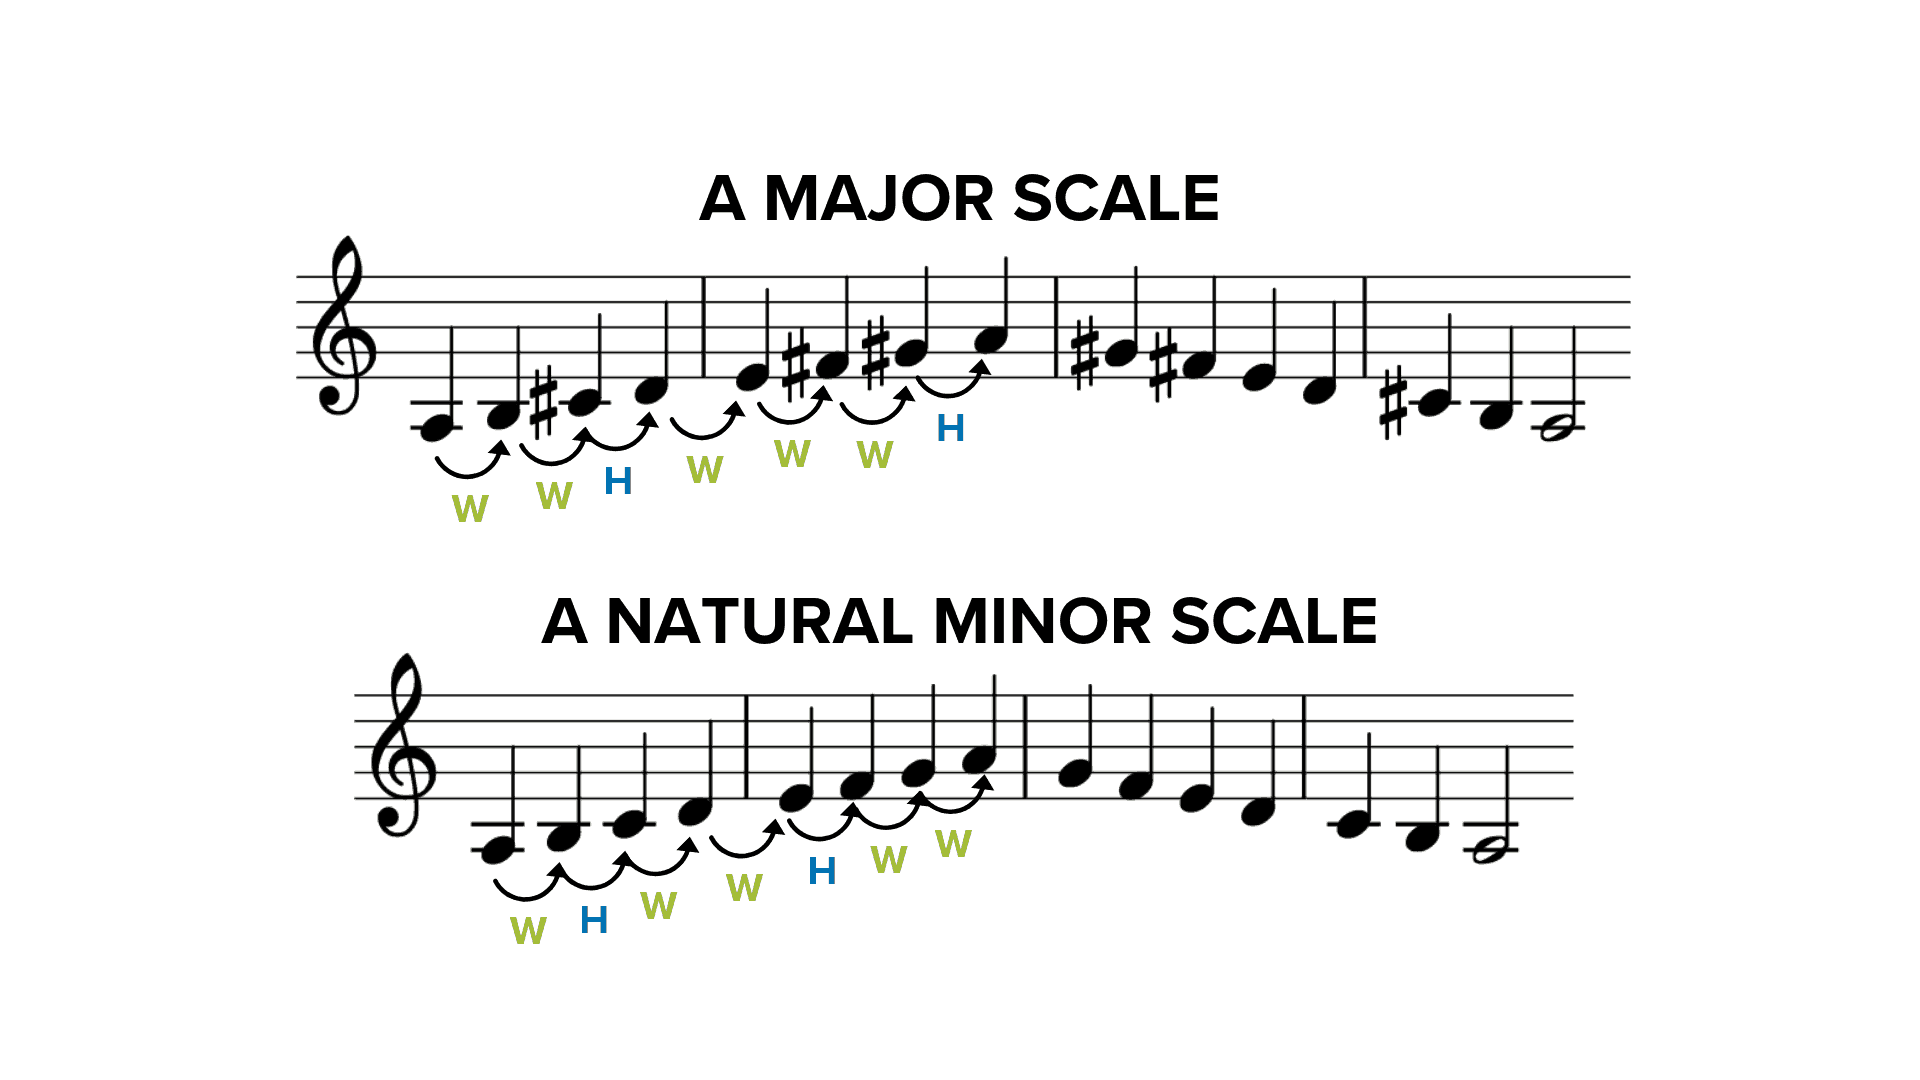 The 3 Types of Minor Scales in Music — Musicnotes Now